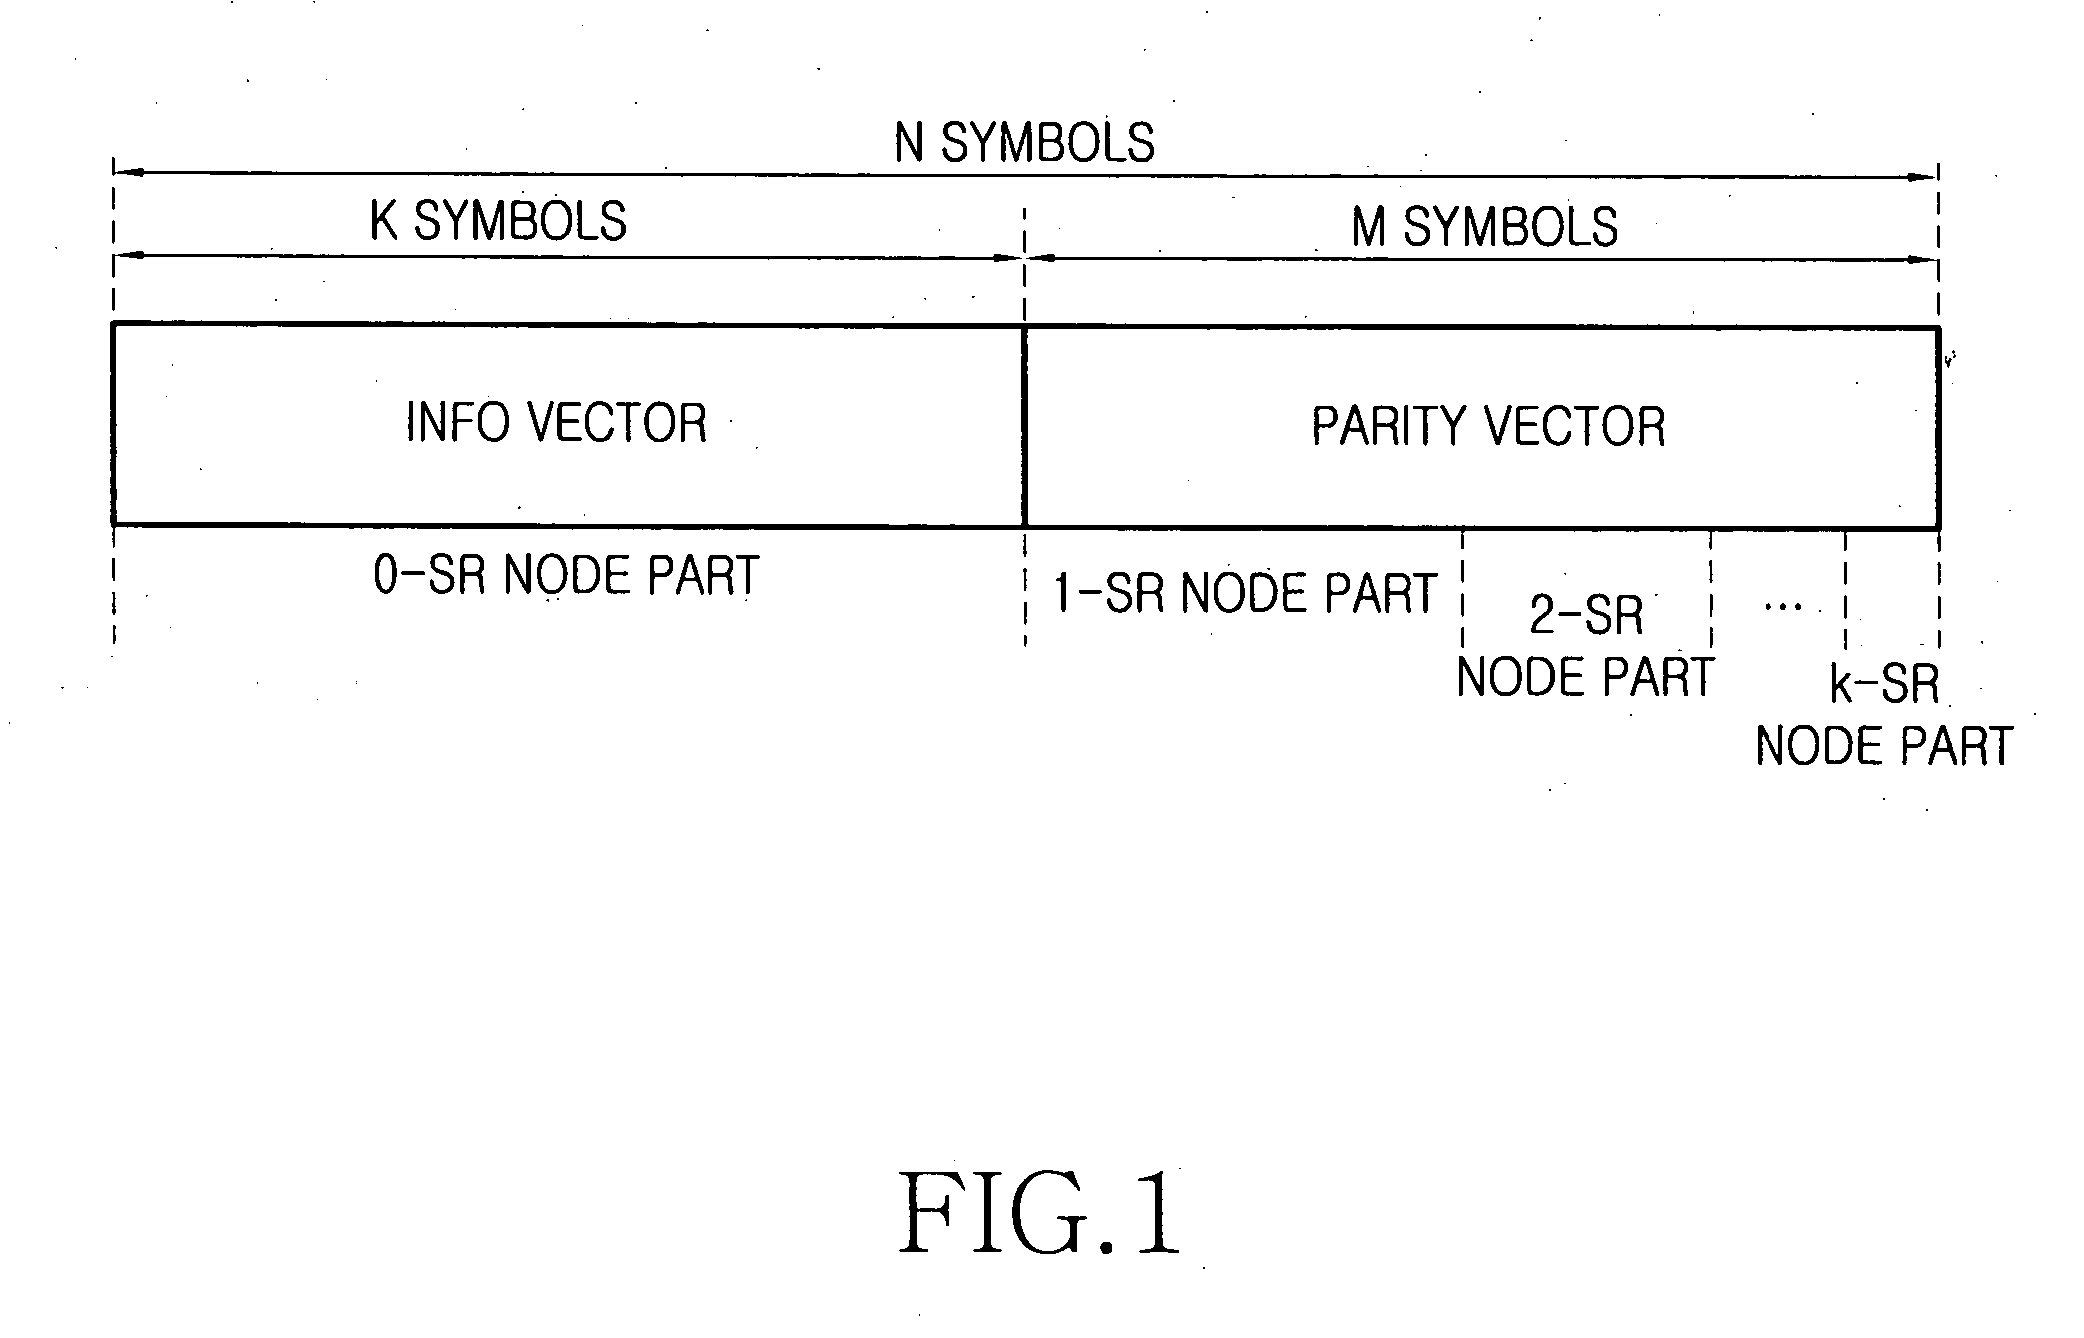 Apparatus and method for transmitting/receiving signal in a communication system